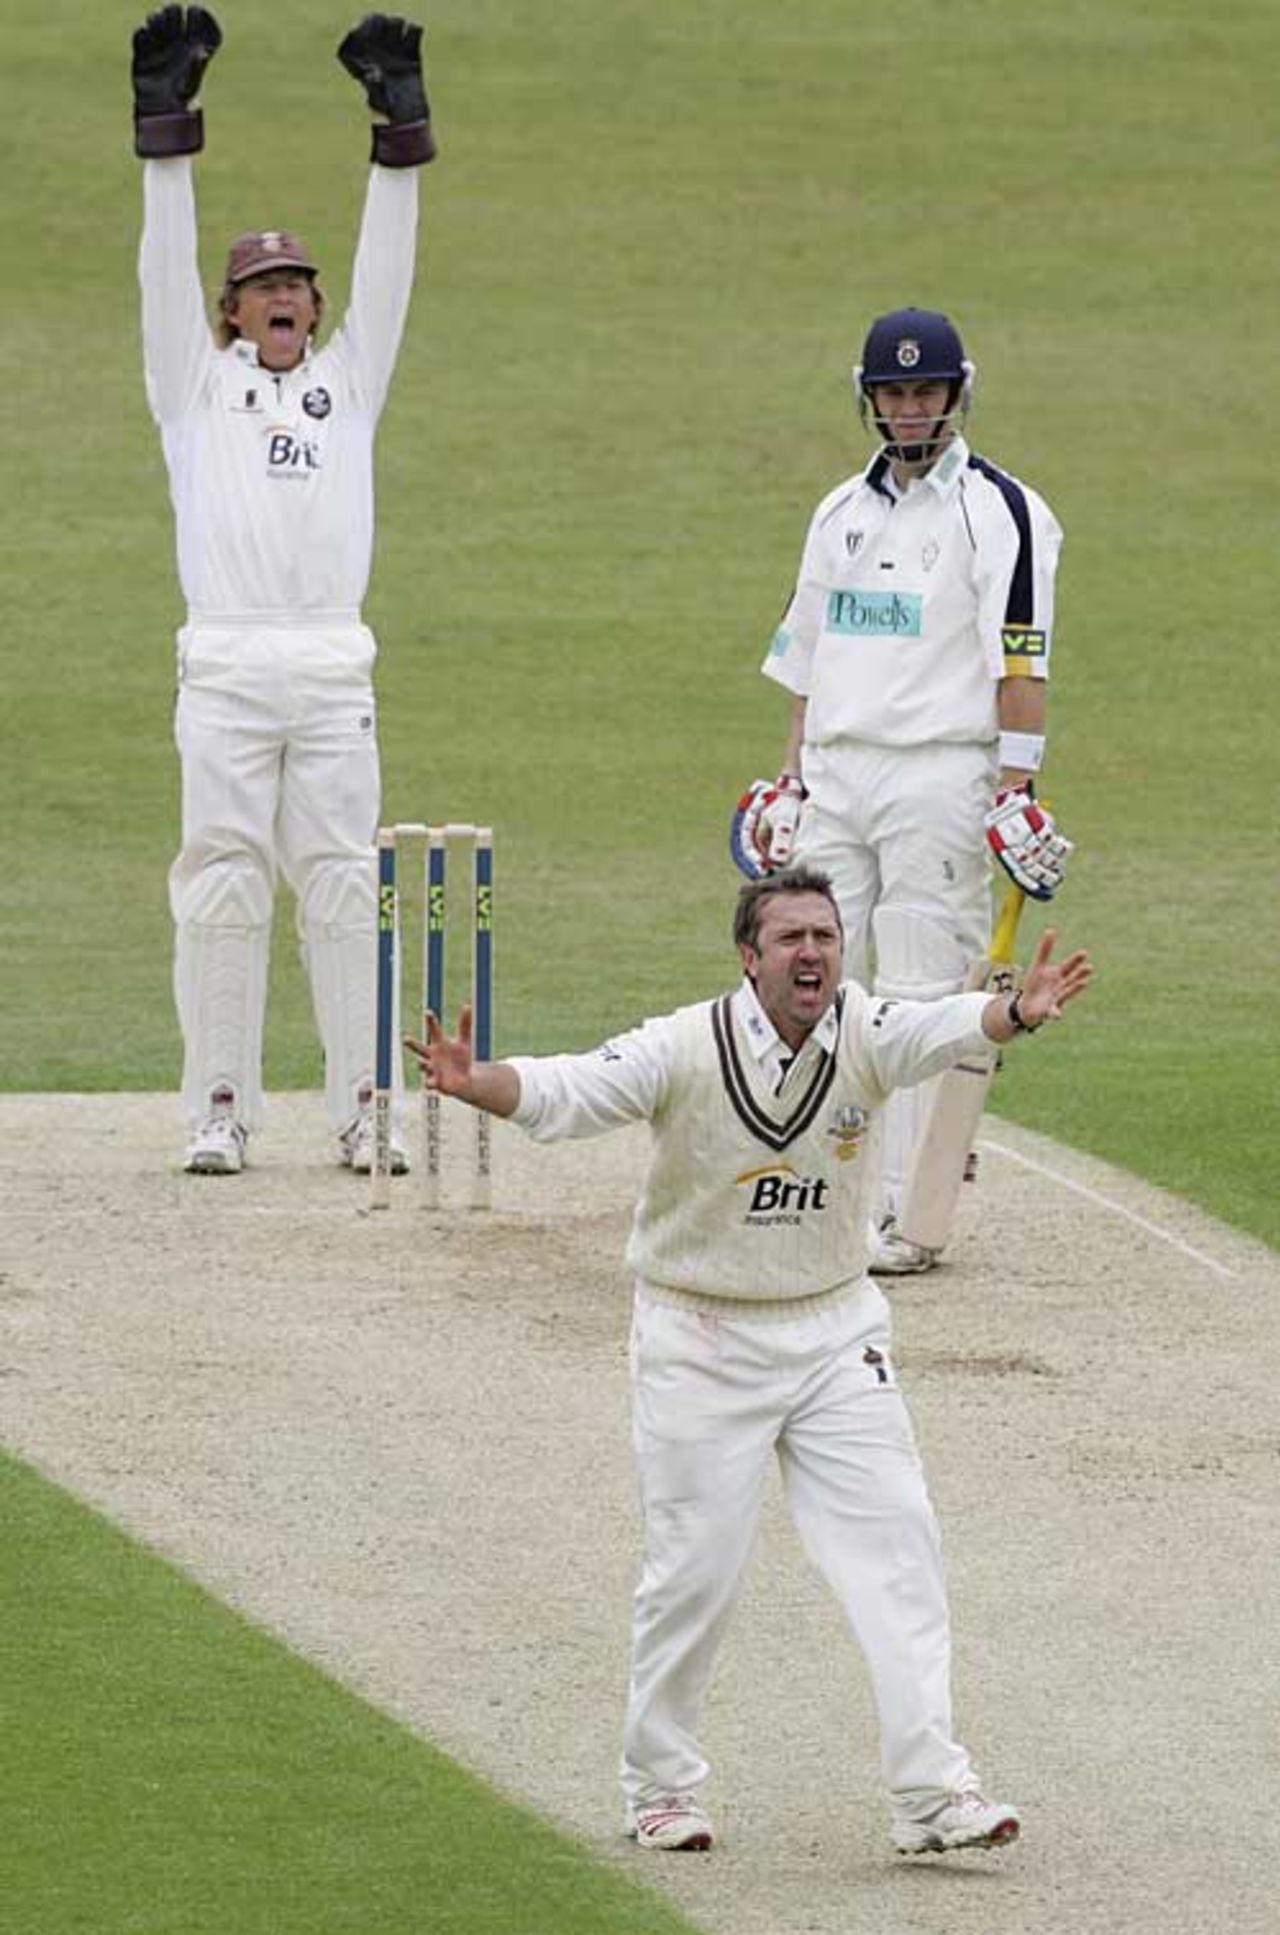 Ian Salisbury roars an appeal against Michael Brown, Surrey v Hampshire, County Championship, Division One, The Oval, April 25, 2007